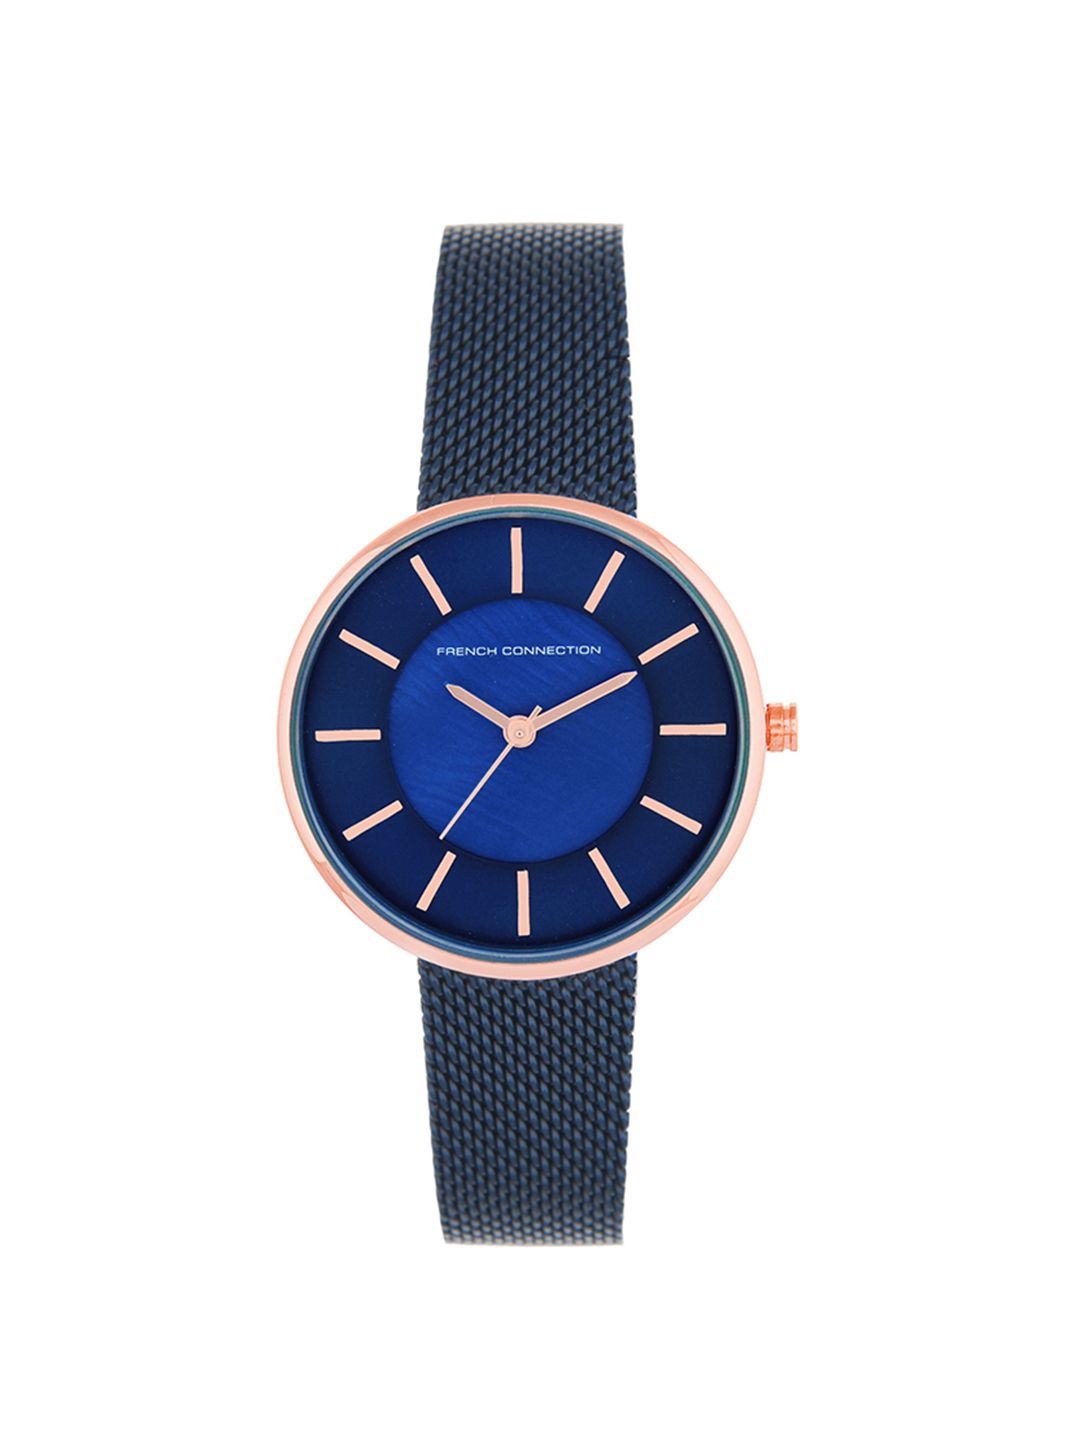 French Connection Women Blue Analogue Watch FCN0005E Price in India